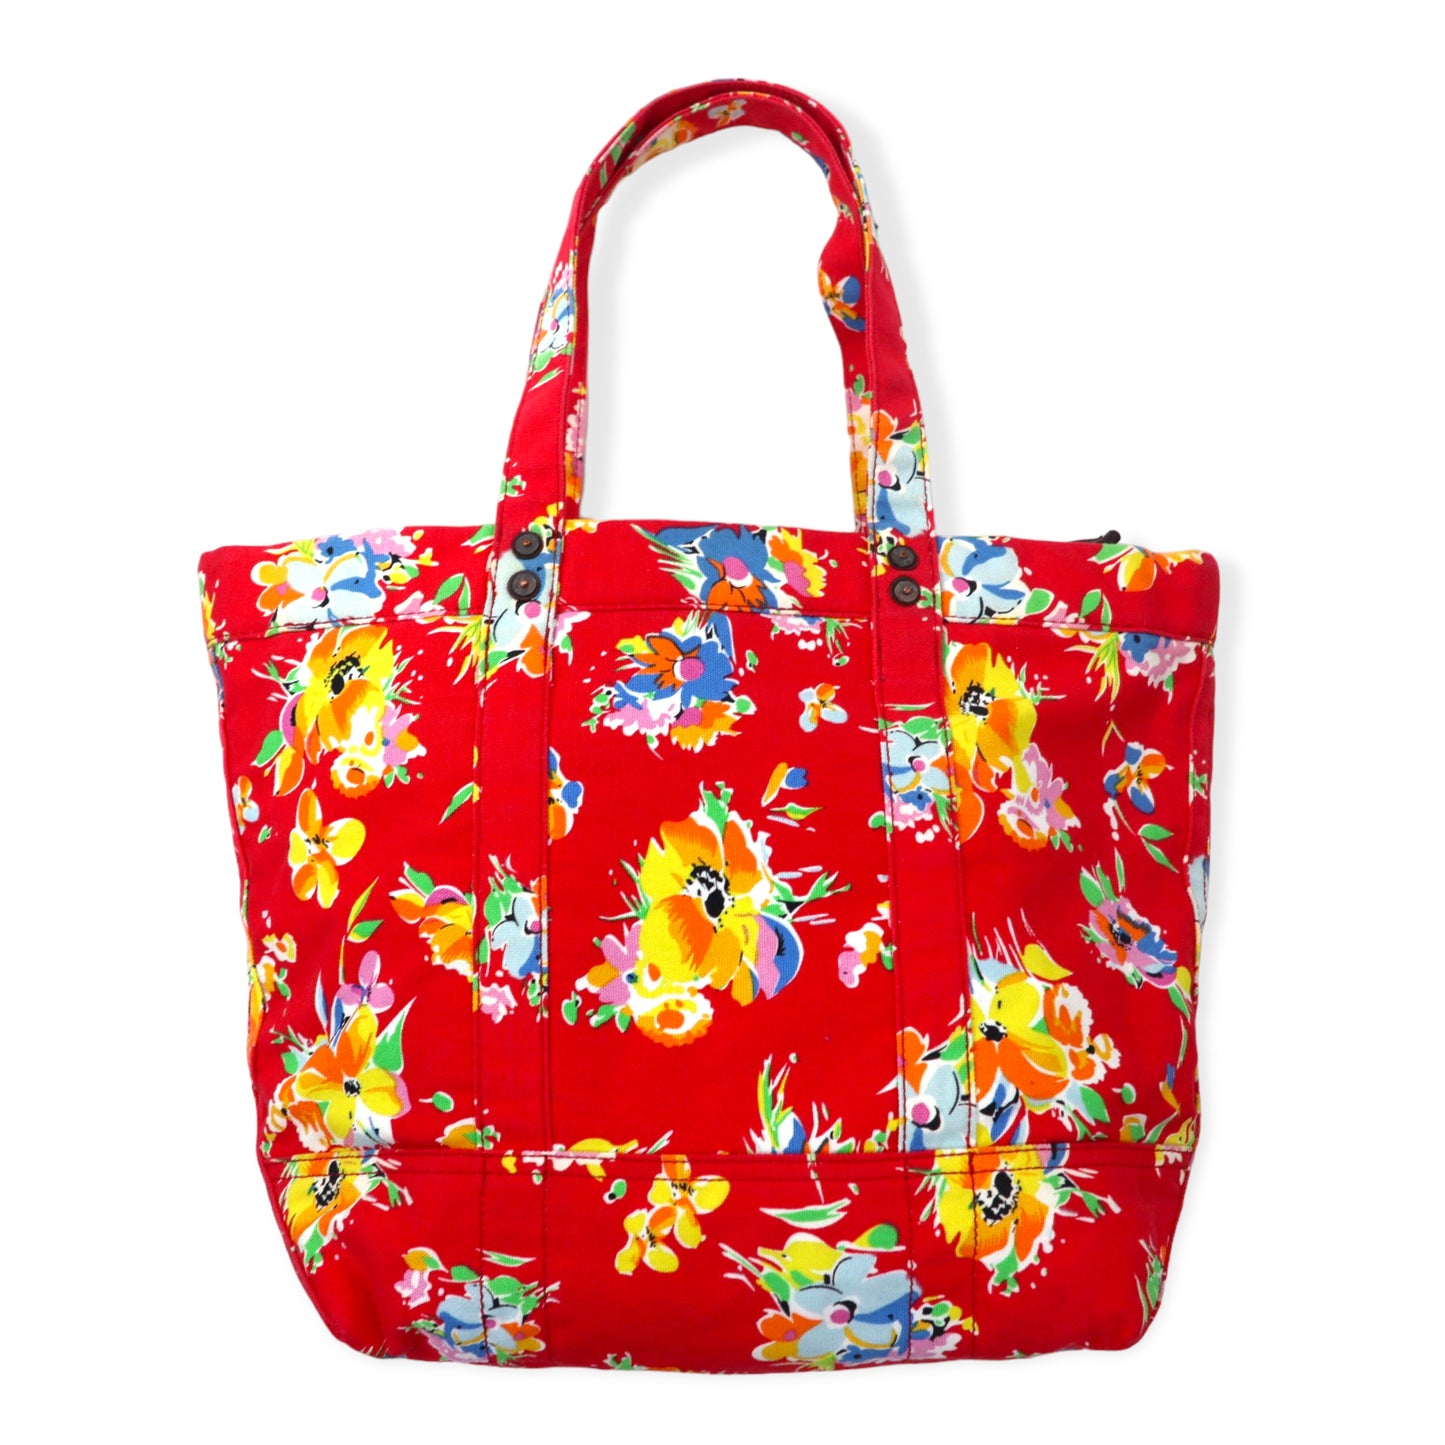 POLO RALPH LAUREN Floral Tote Bag Red Canvas Embroidery Big Pony 